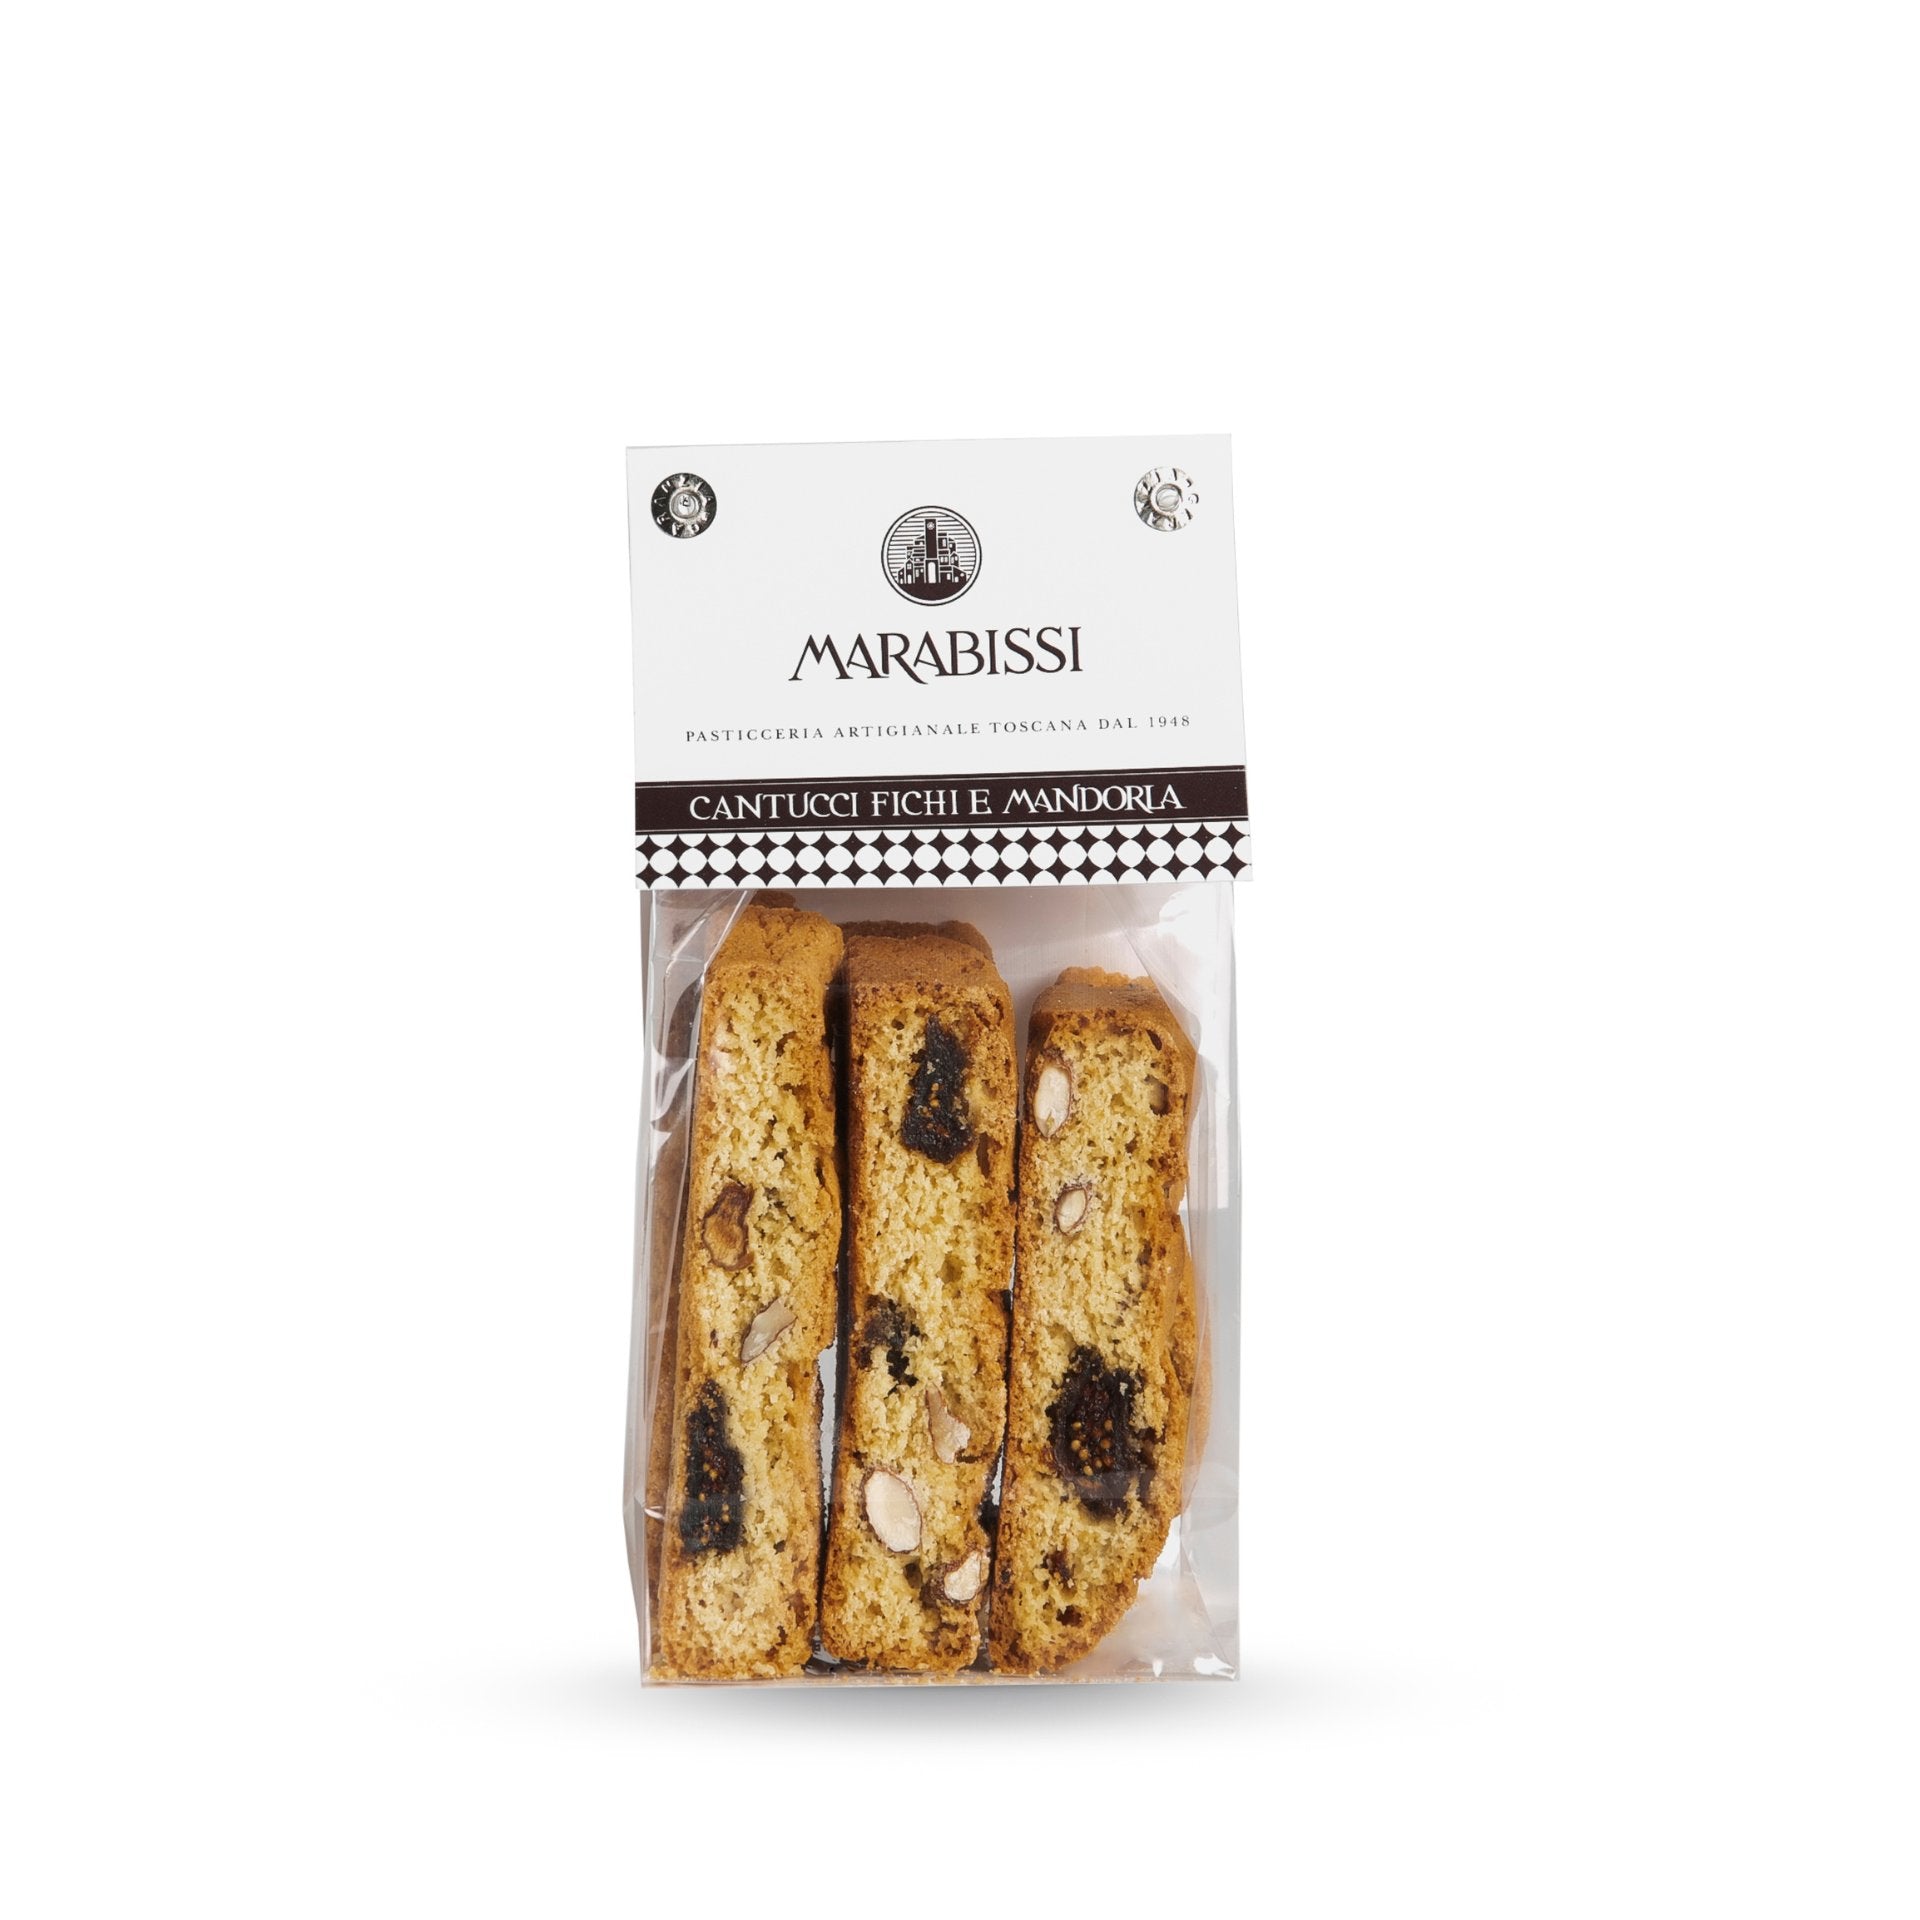 Marabissi Fig & Almond Cantucci (Bag) 120g  | Imported and distributed in the UK by Just Gourmet Foods